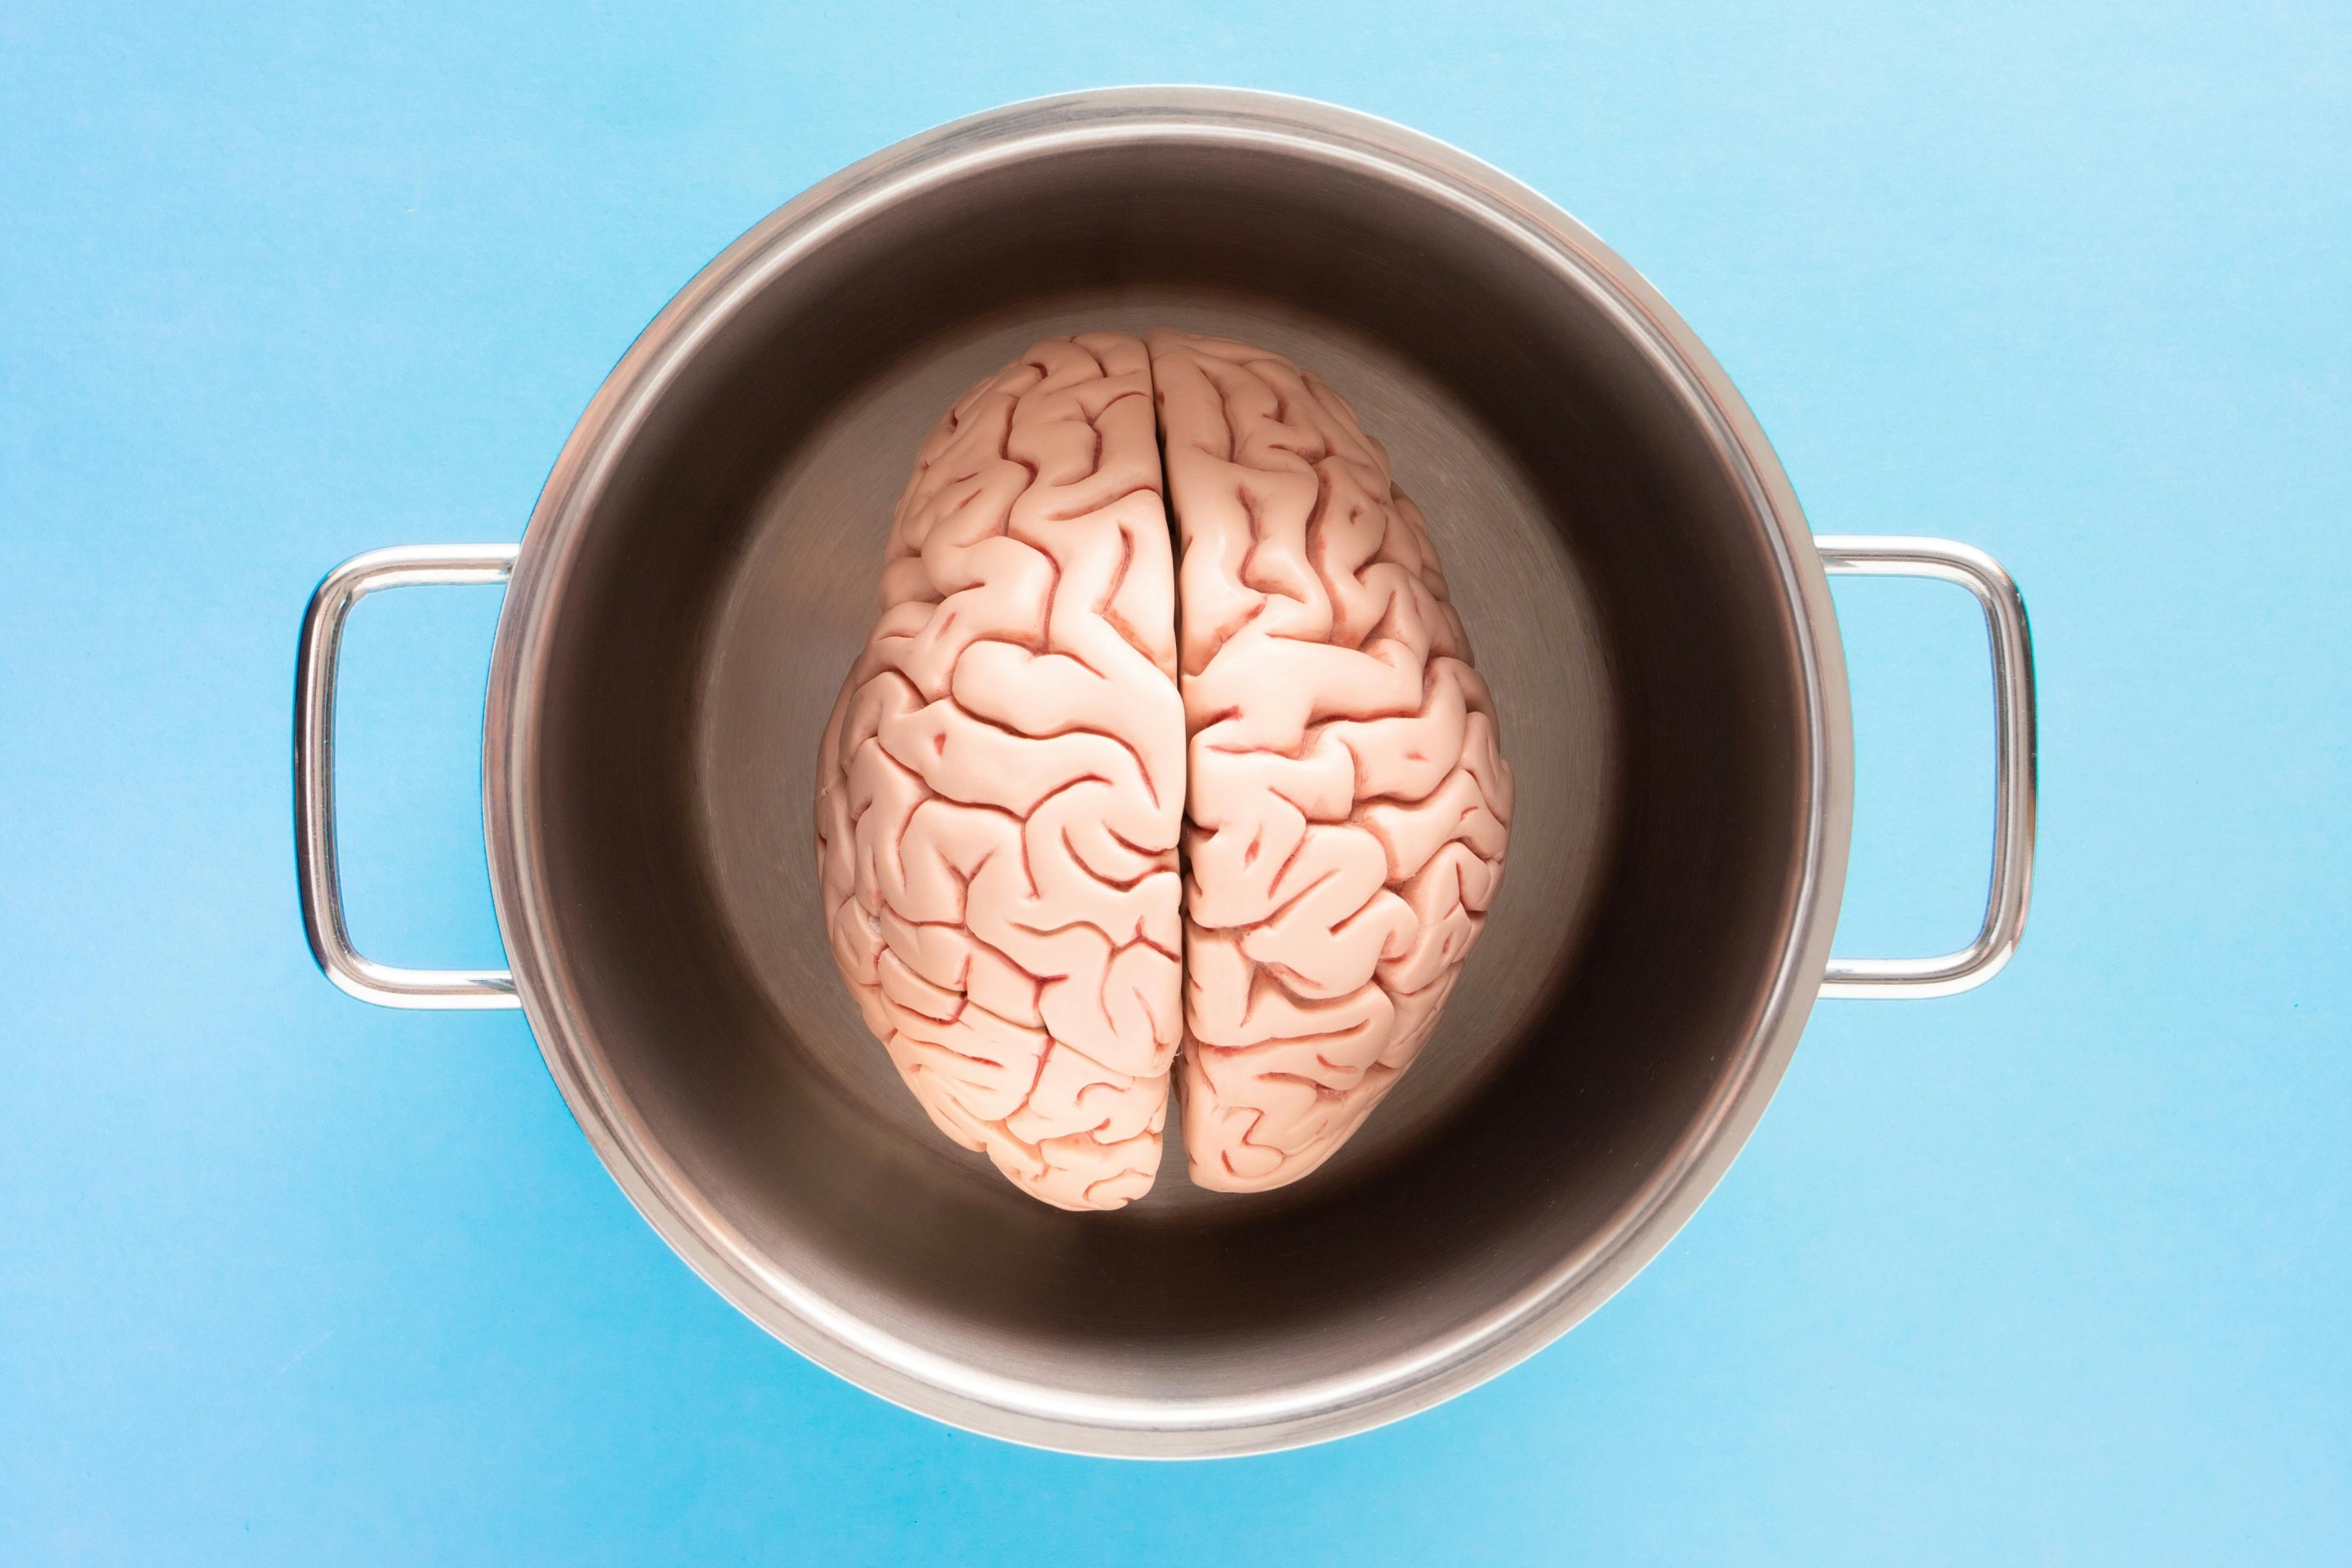 A brain in a metal pot on a light blue background